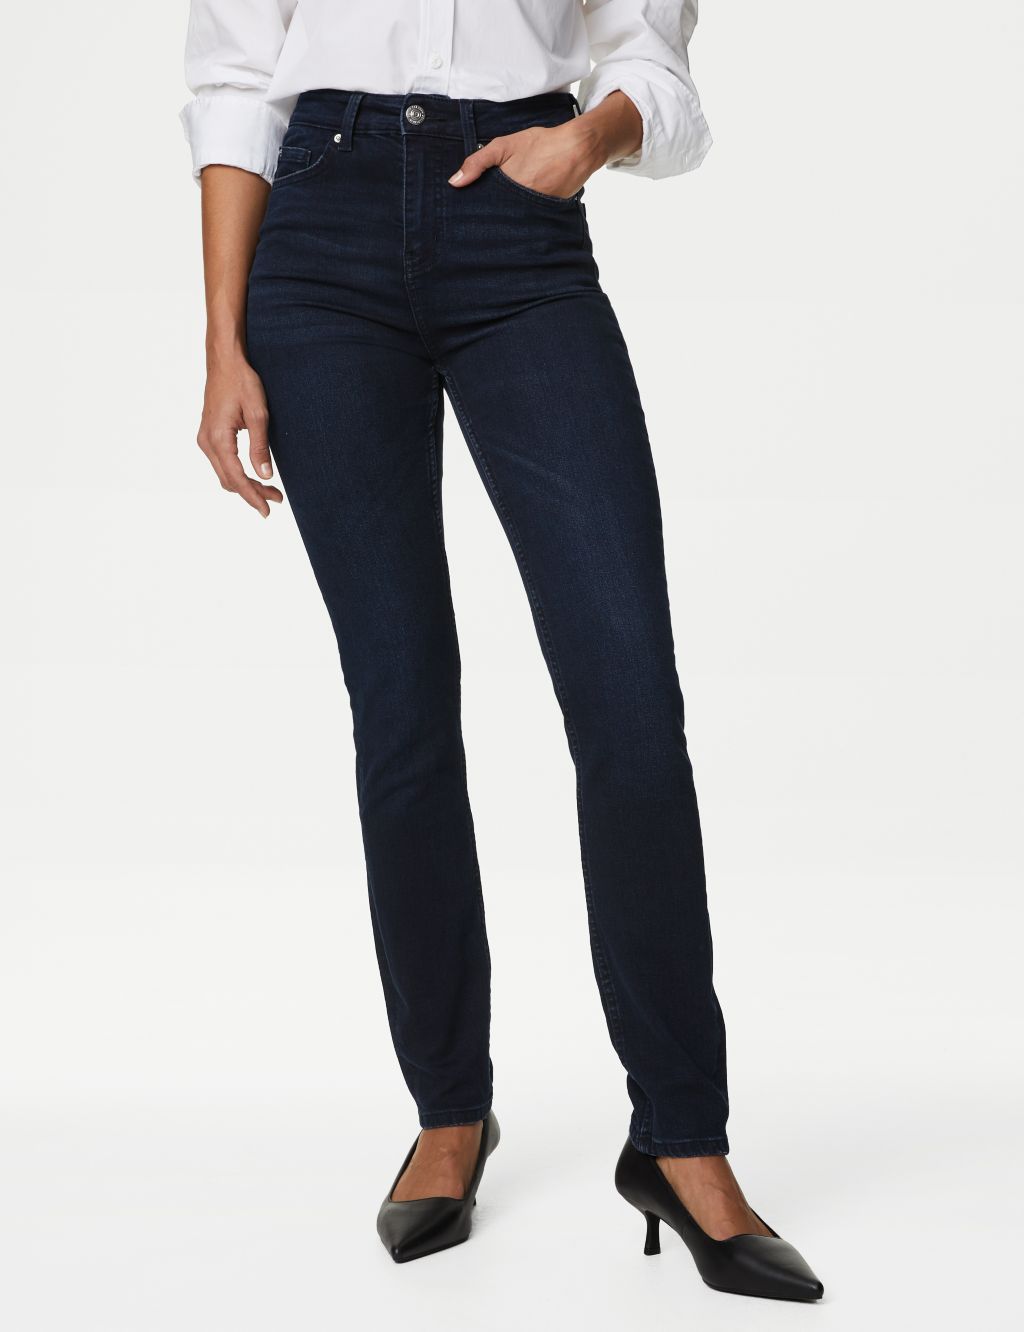 18 Best Jeans for Women 2020 - Best Fitting Jeans by Style and